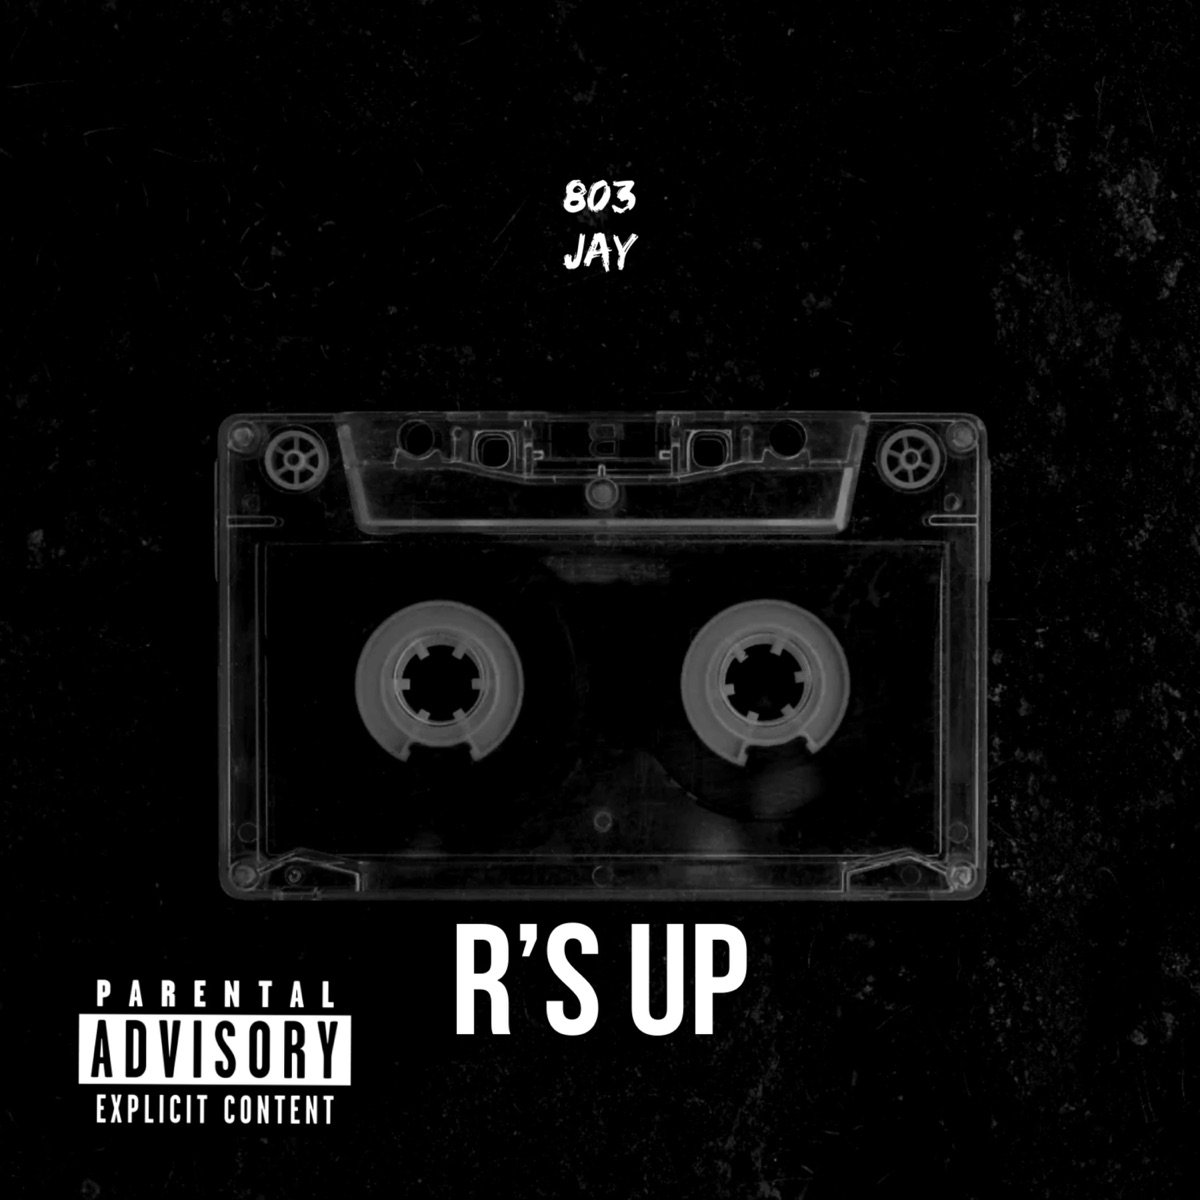 R's UP - Single - Album by 803jay - Apple Music